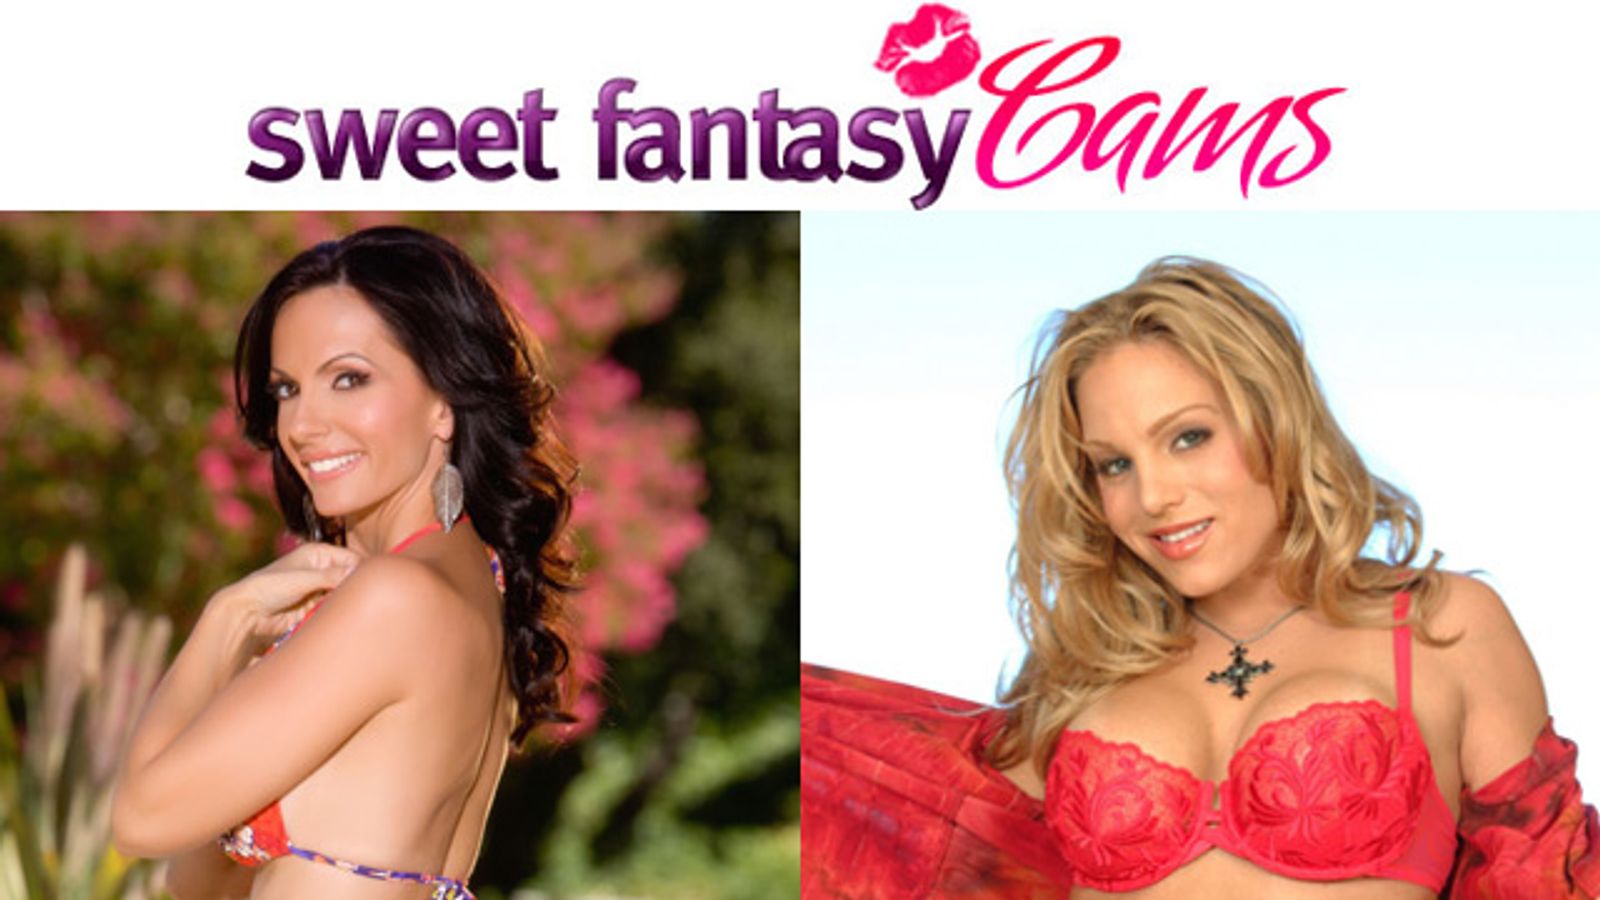 Sweet Fantasy Cams Launches for Solo Girls